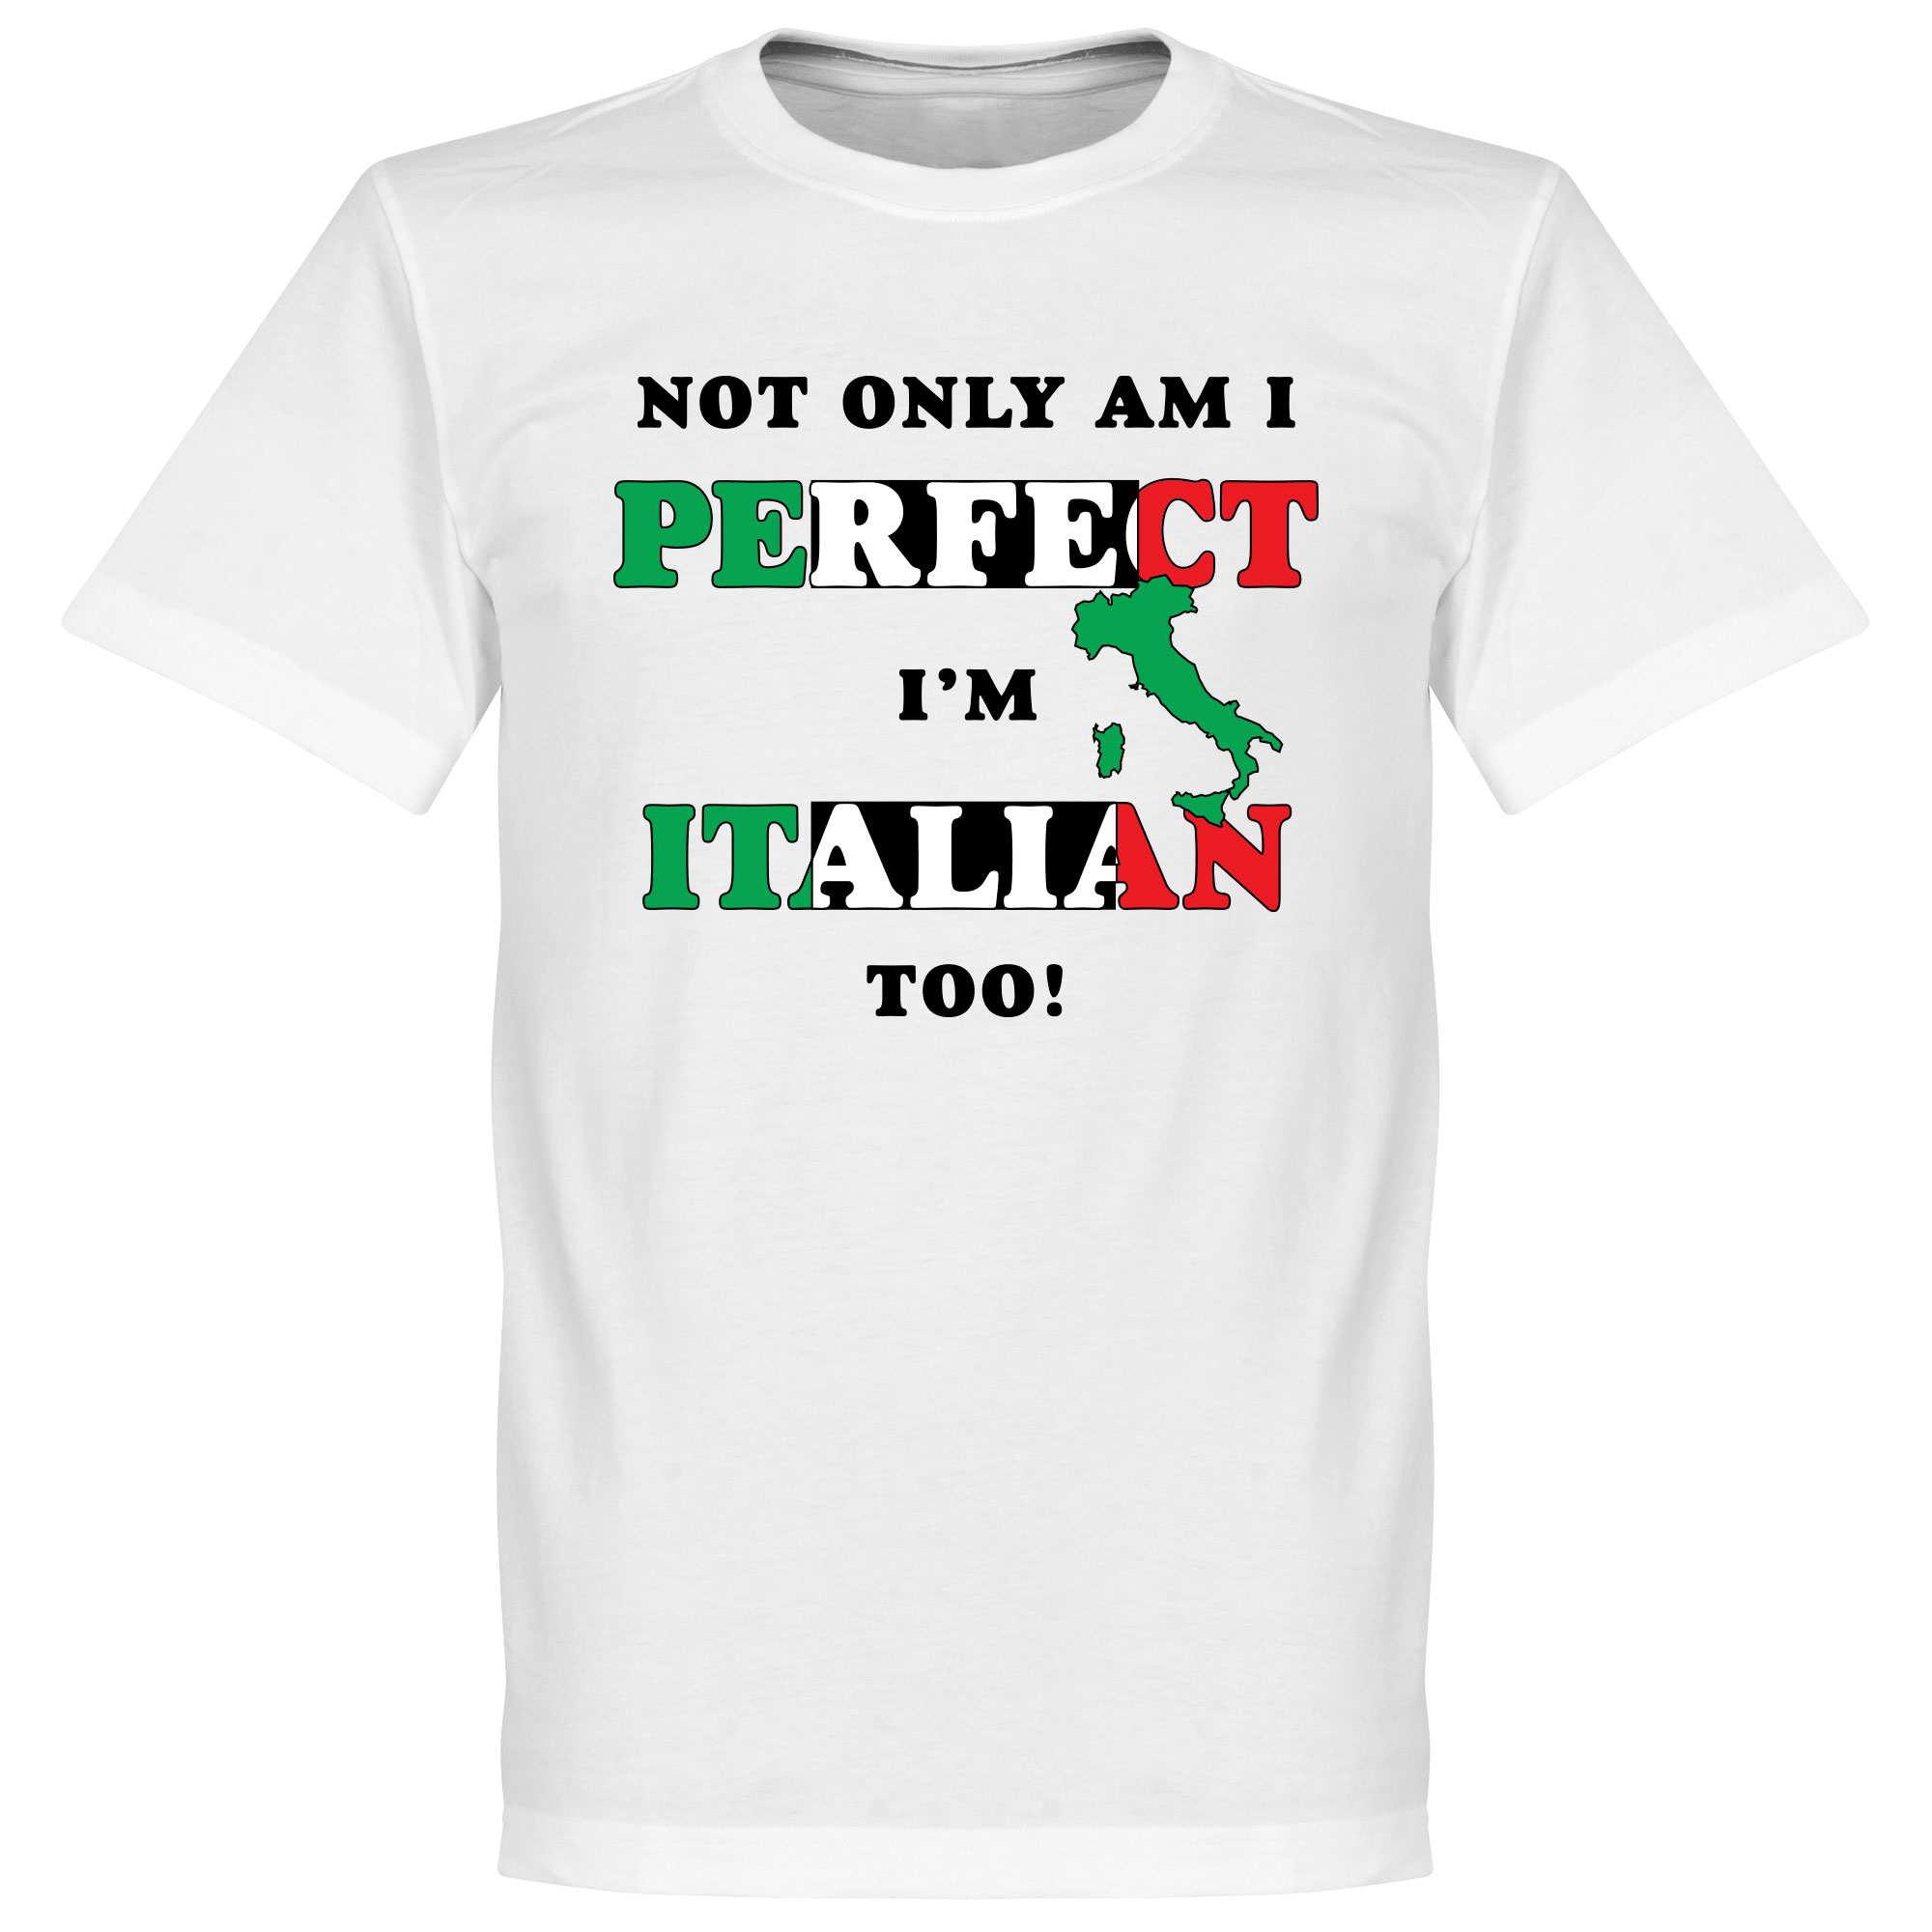 Not Only Am I Perfect, I'm Italian Too! T-Shirt KIDS 2